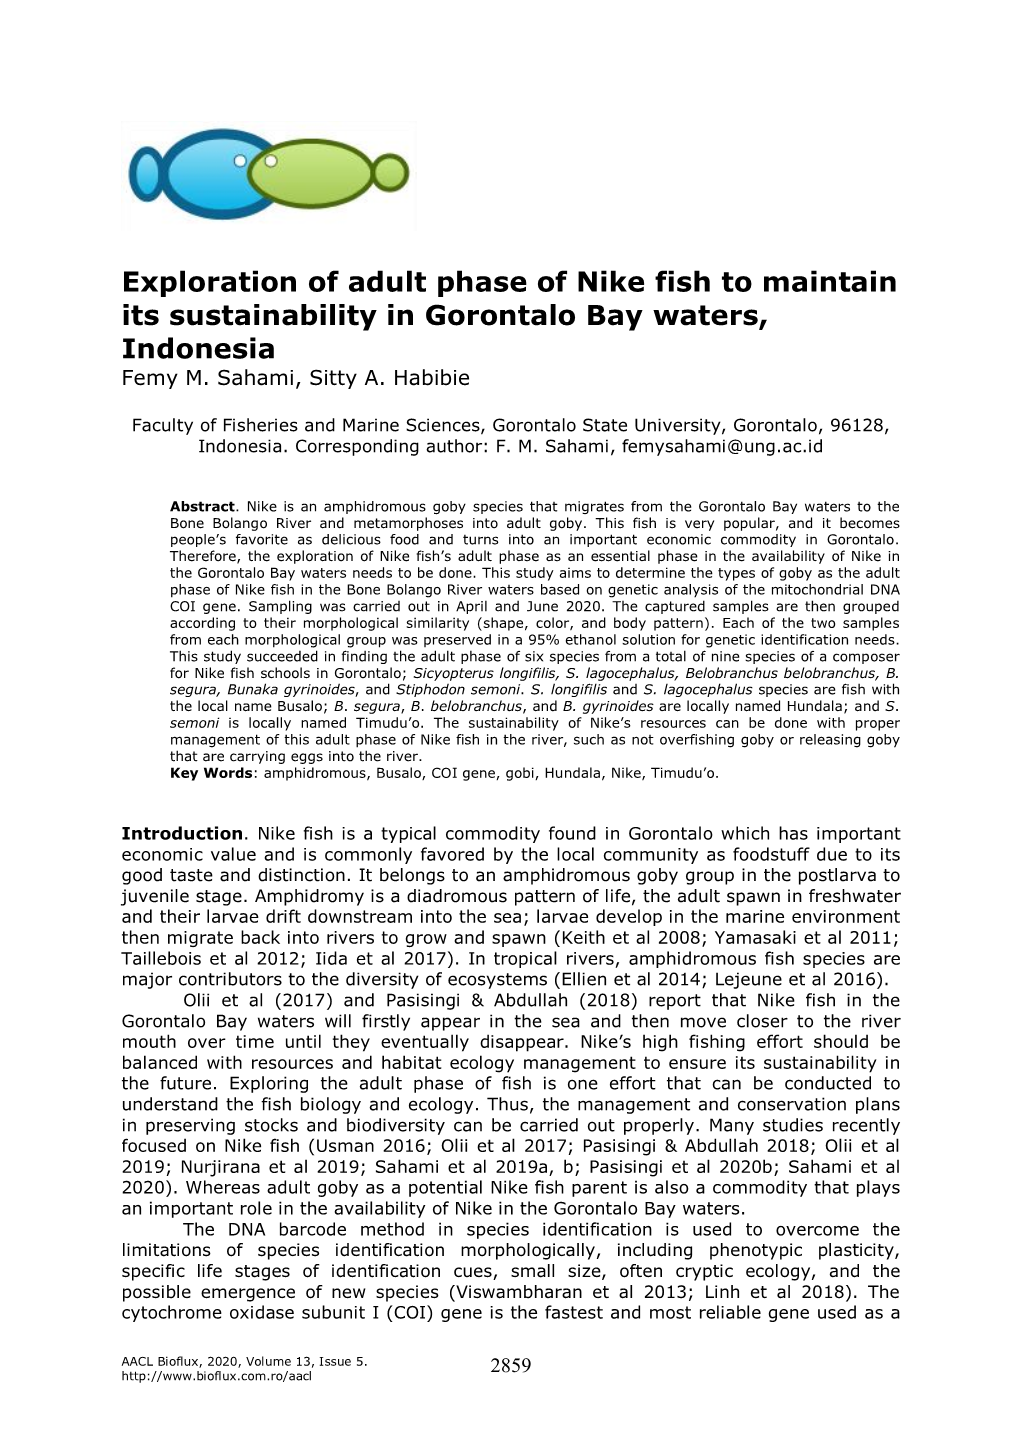 Sahami F. M., Habibie S. A., 2020 Exploration of Adult Phase of Nike Fish to Maintain Its Sustainability in Gorontalo Bay Waters, Indonesia